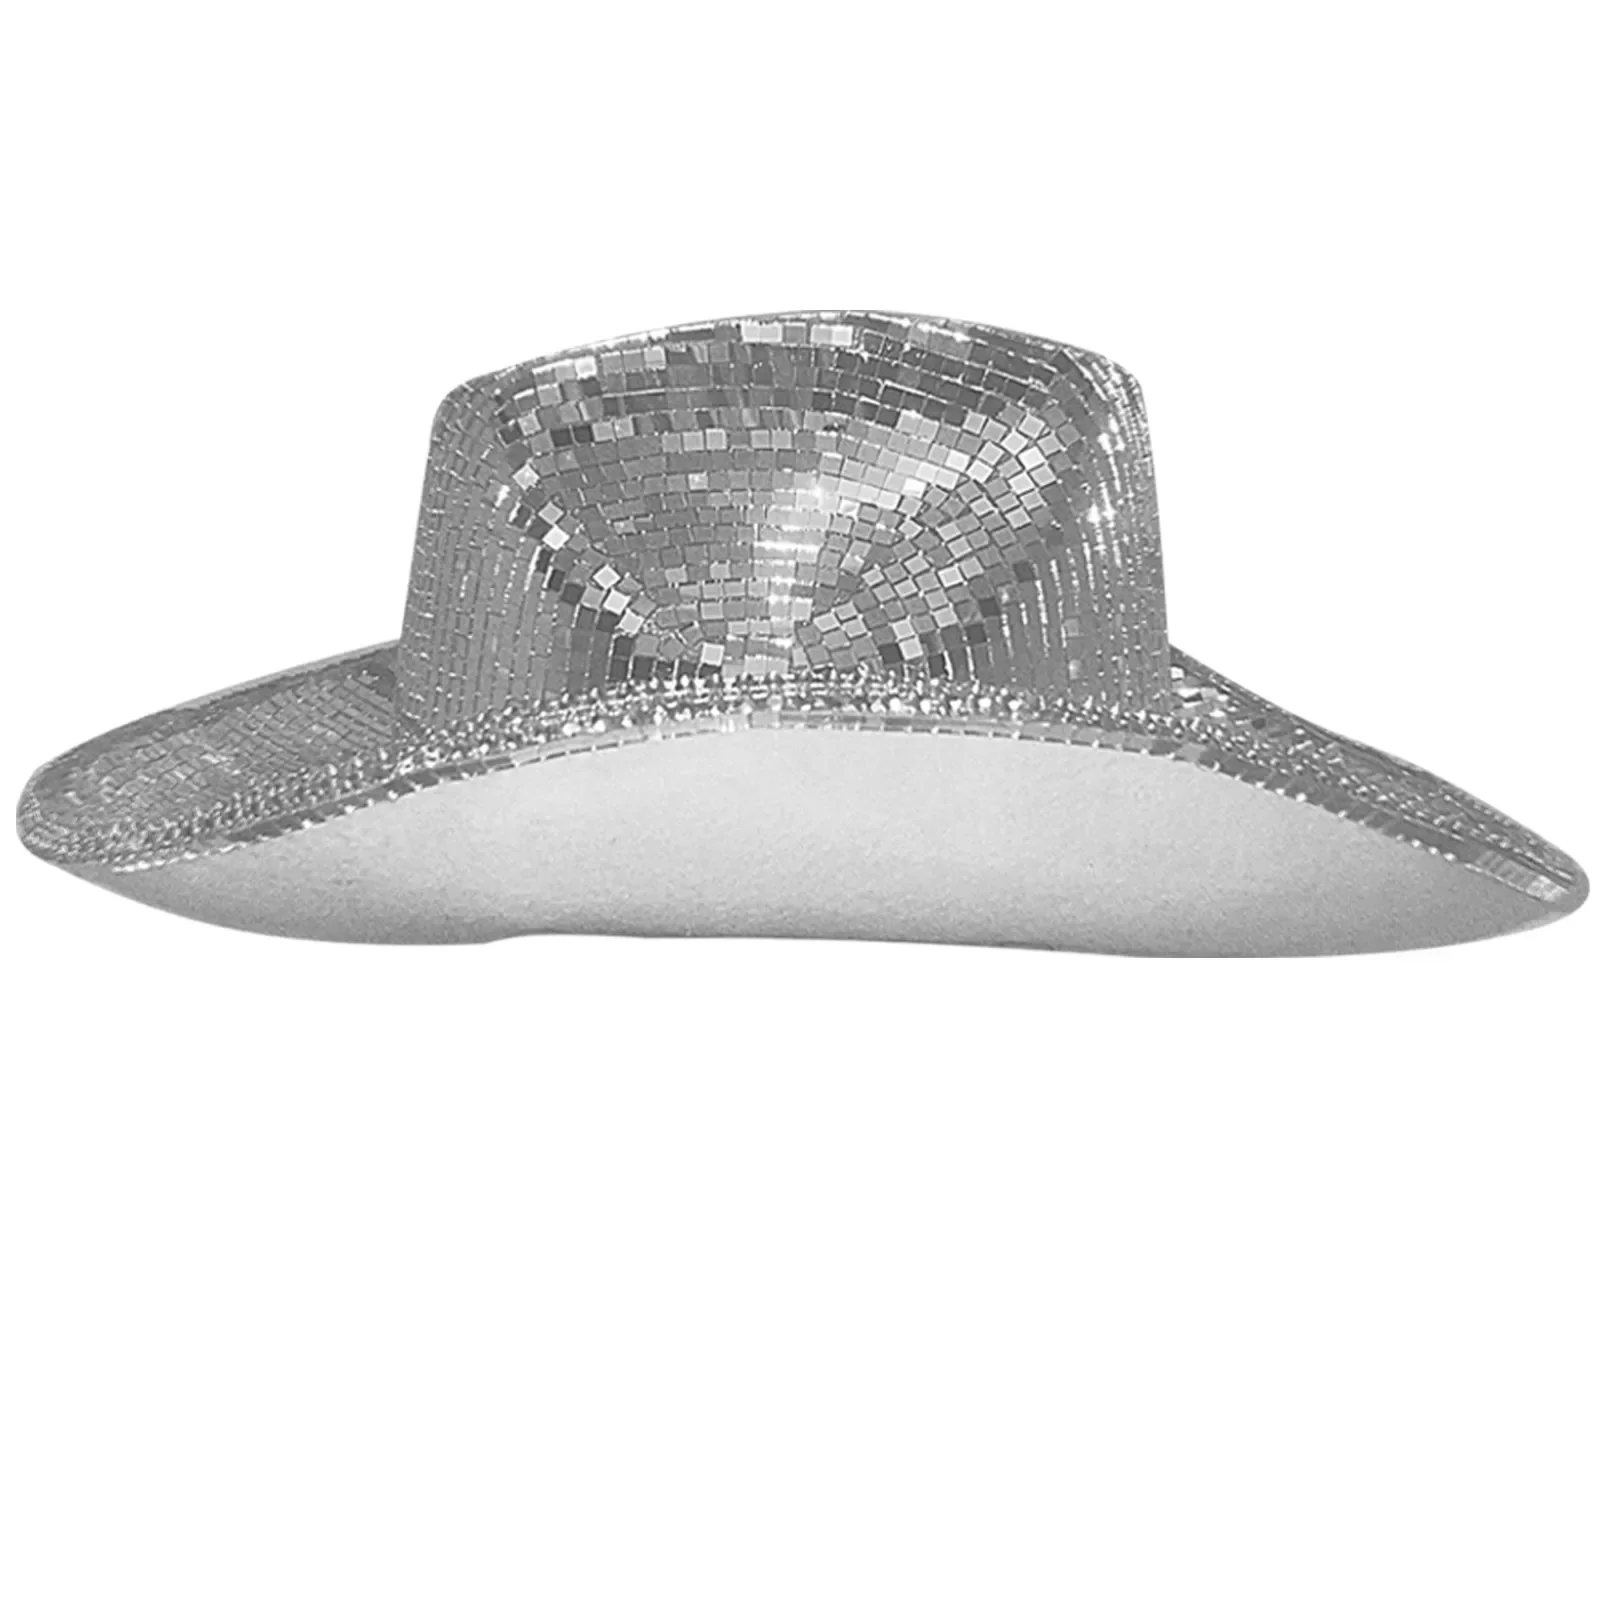 

Disco Ball Cowboy Hat Cowgirl Hats Look Stunning In The Sun Cowboy Caps With Mirrored Glass Jewels Mesh Accents Womens Sun Hat